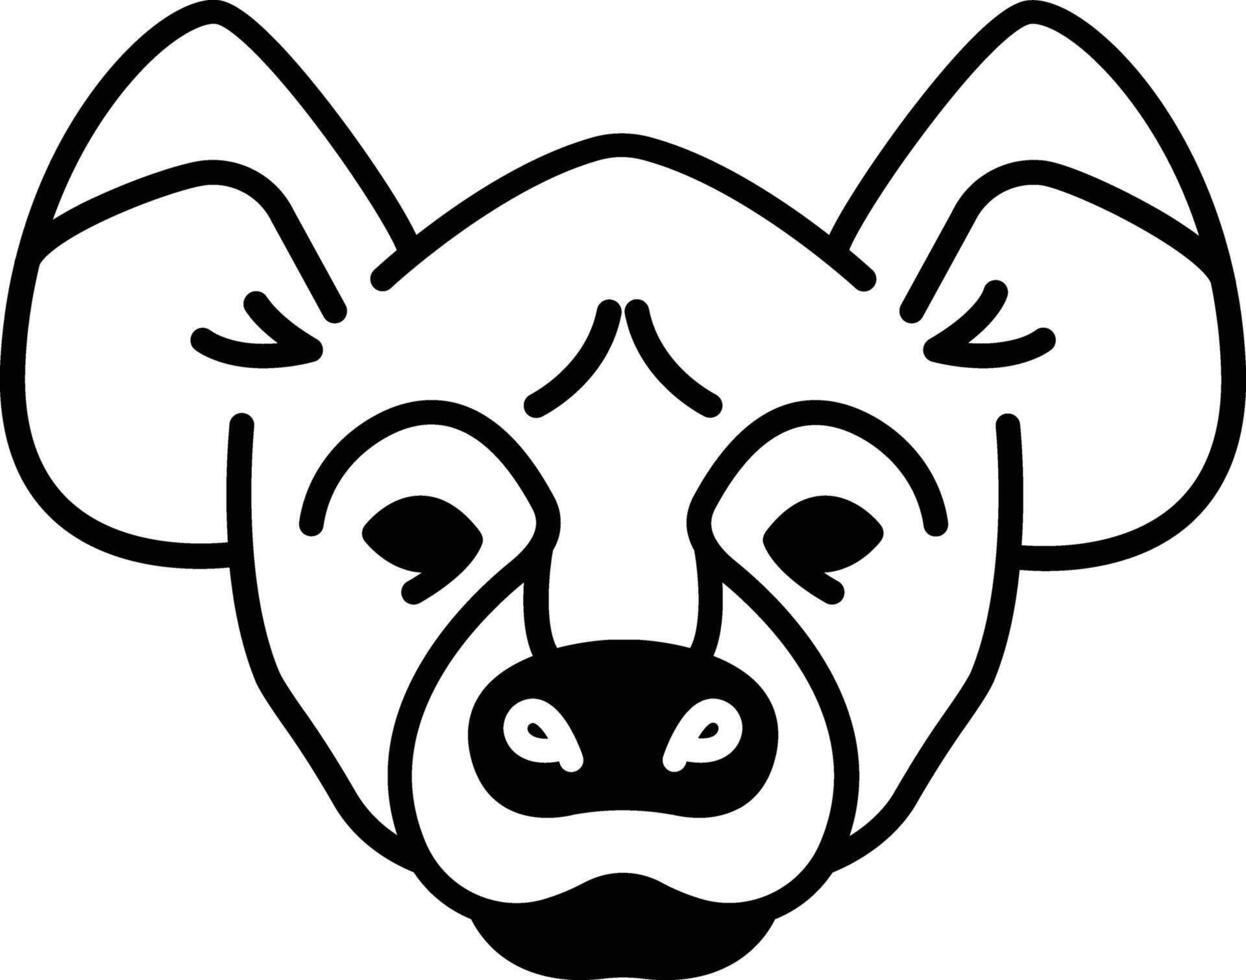 Hyena face glyph and line vector illustration